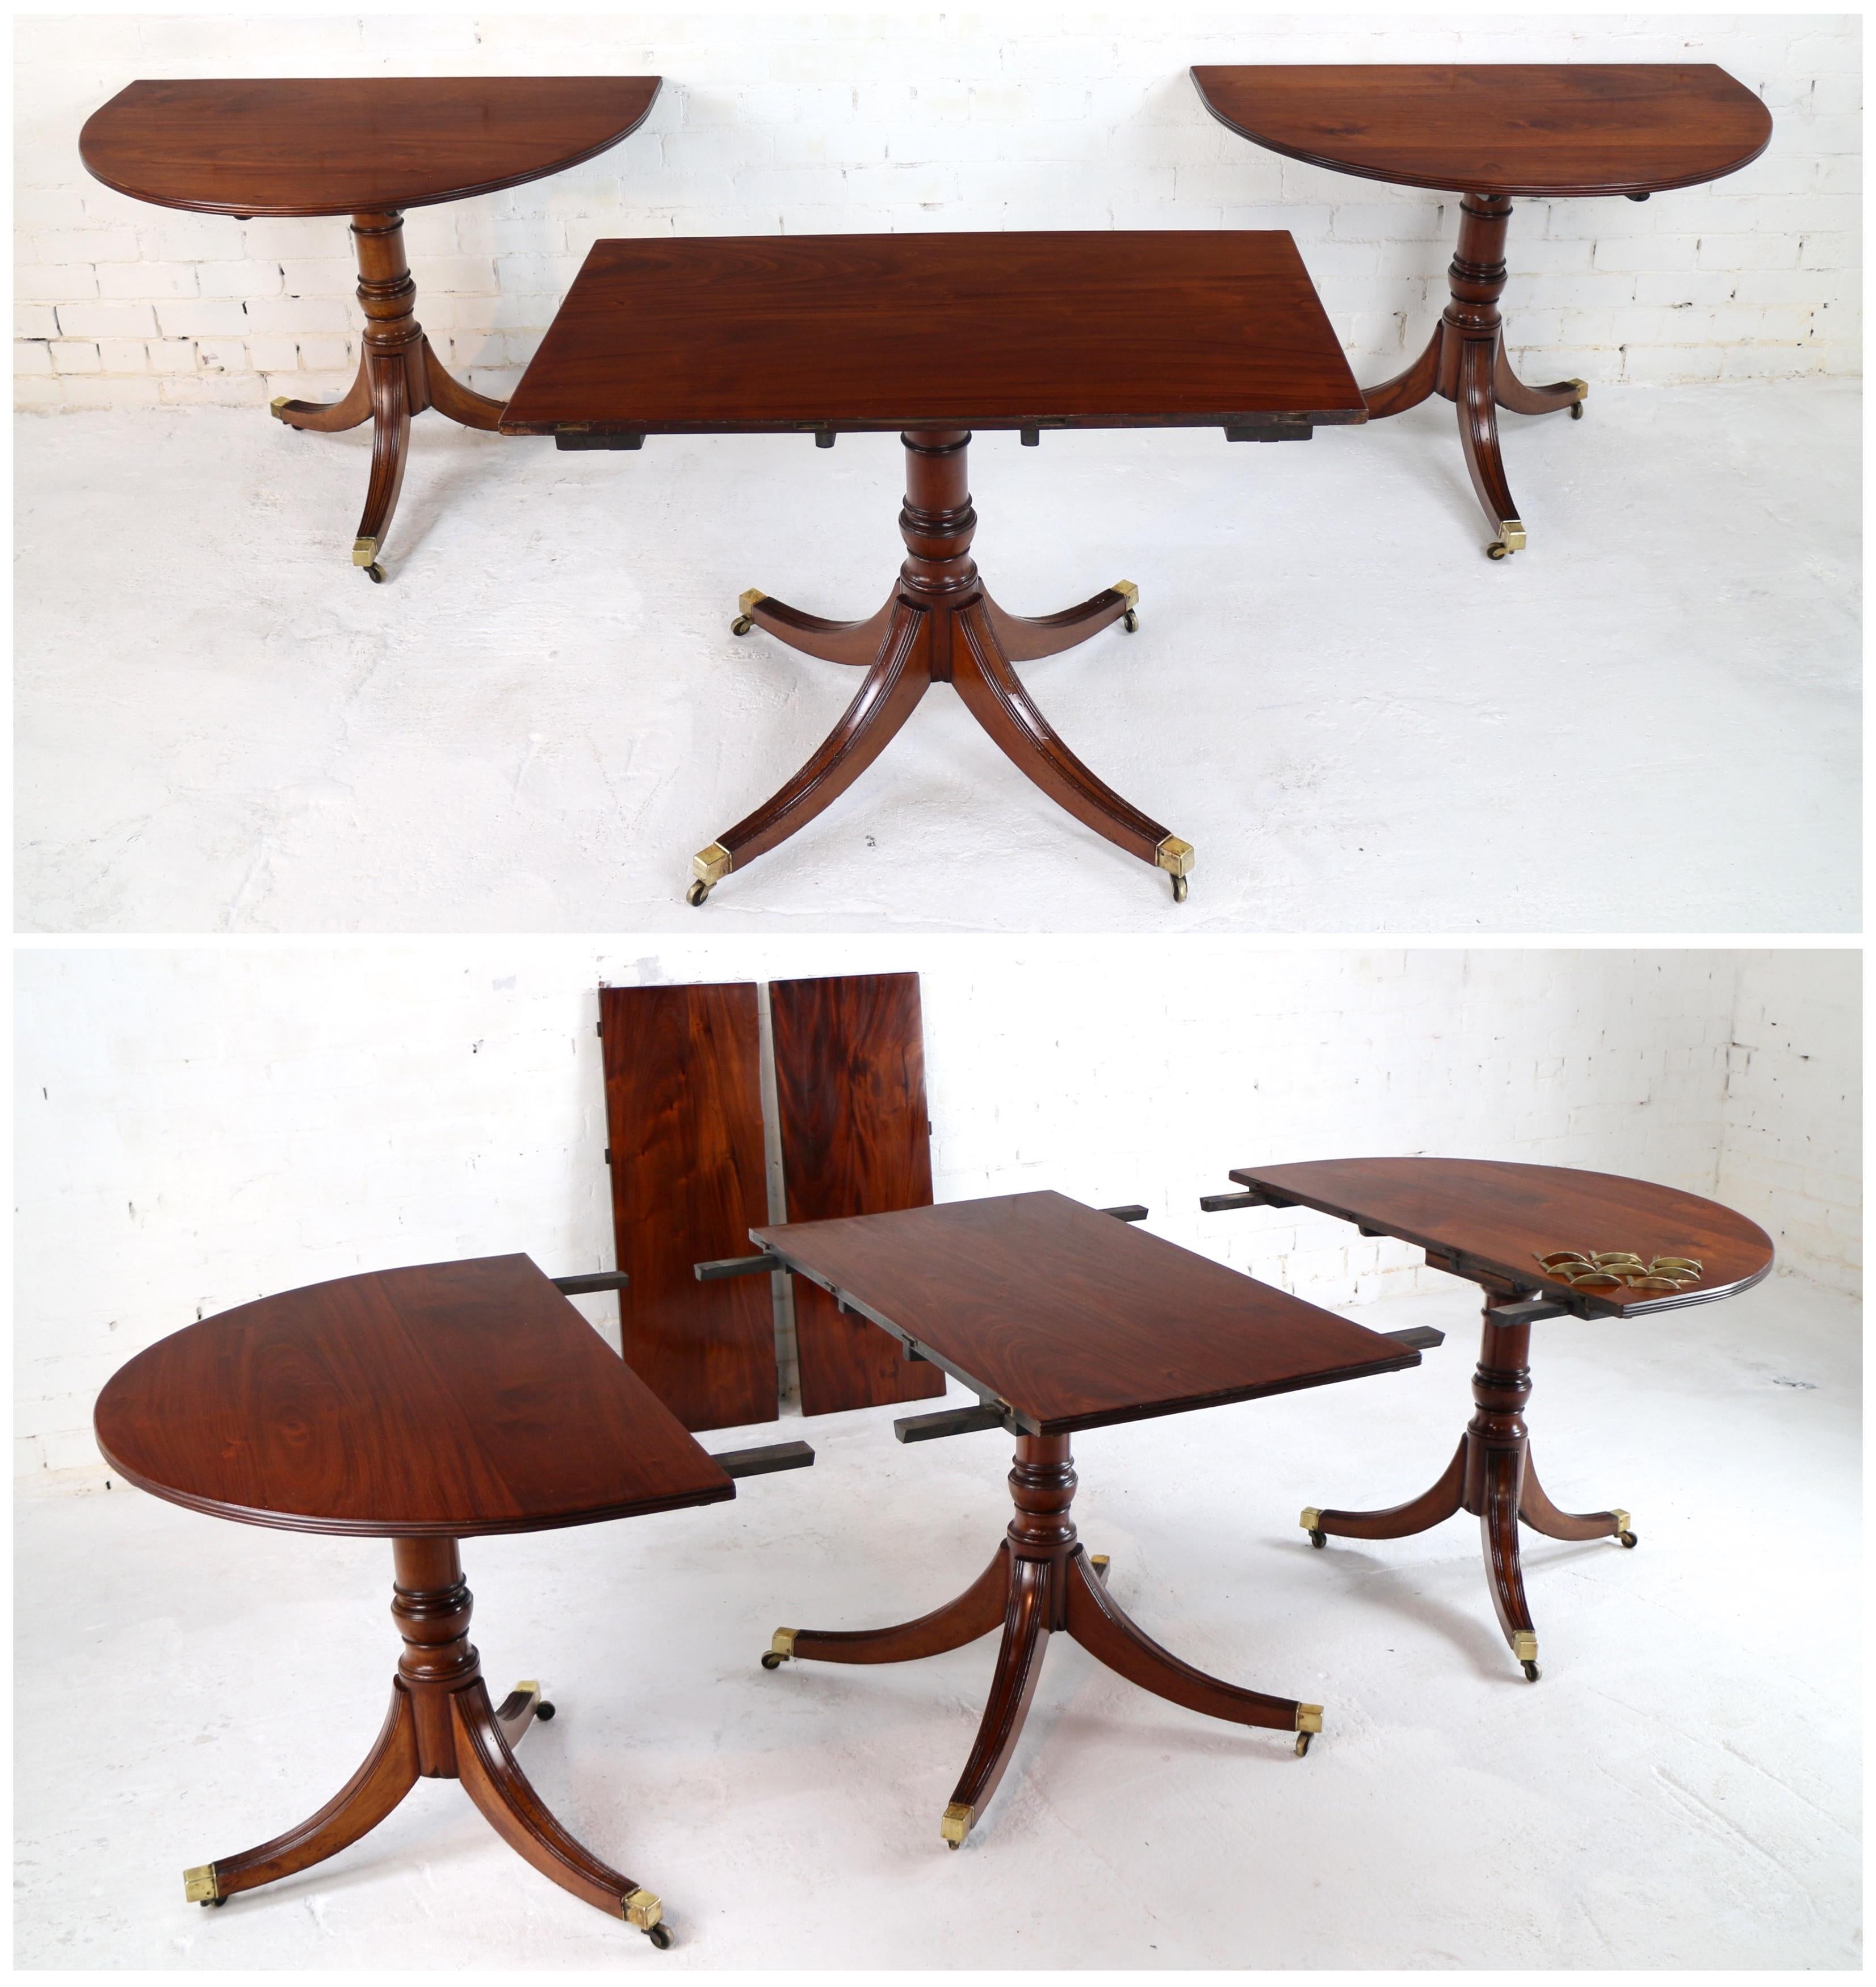 Antique English Regency Solid Mahogany Three Pillar Dining Table and 2 Leaves 1